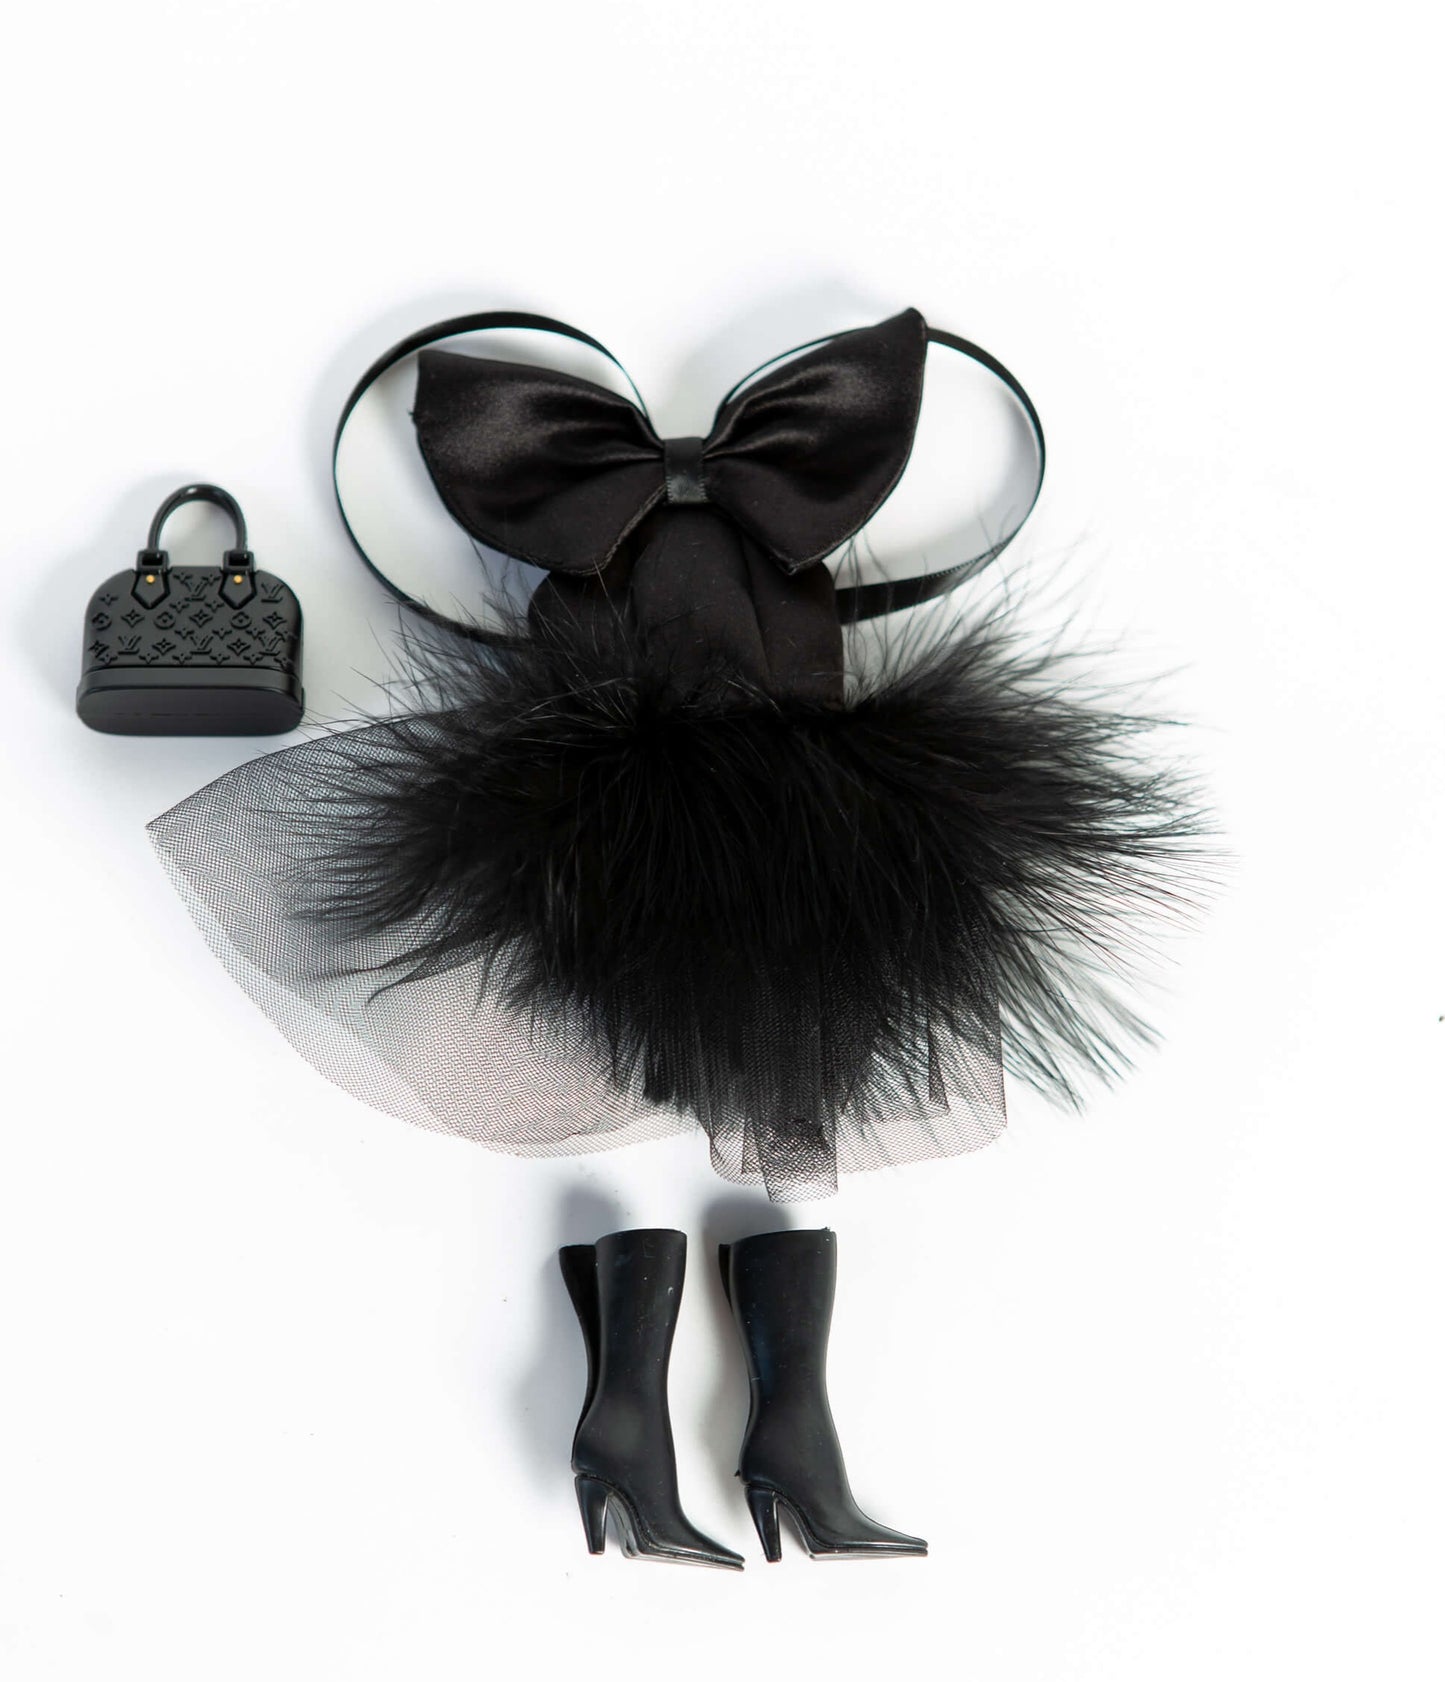 DOLLY® DOLL CLOTHES SET KARL LAGERFELD WITH BLACK TUTU DRESS WITH BOW + BOOTS FOR 12 inch 30 cm 1/6 scale fashion dolls